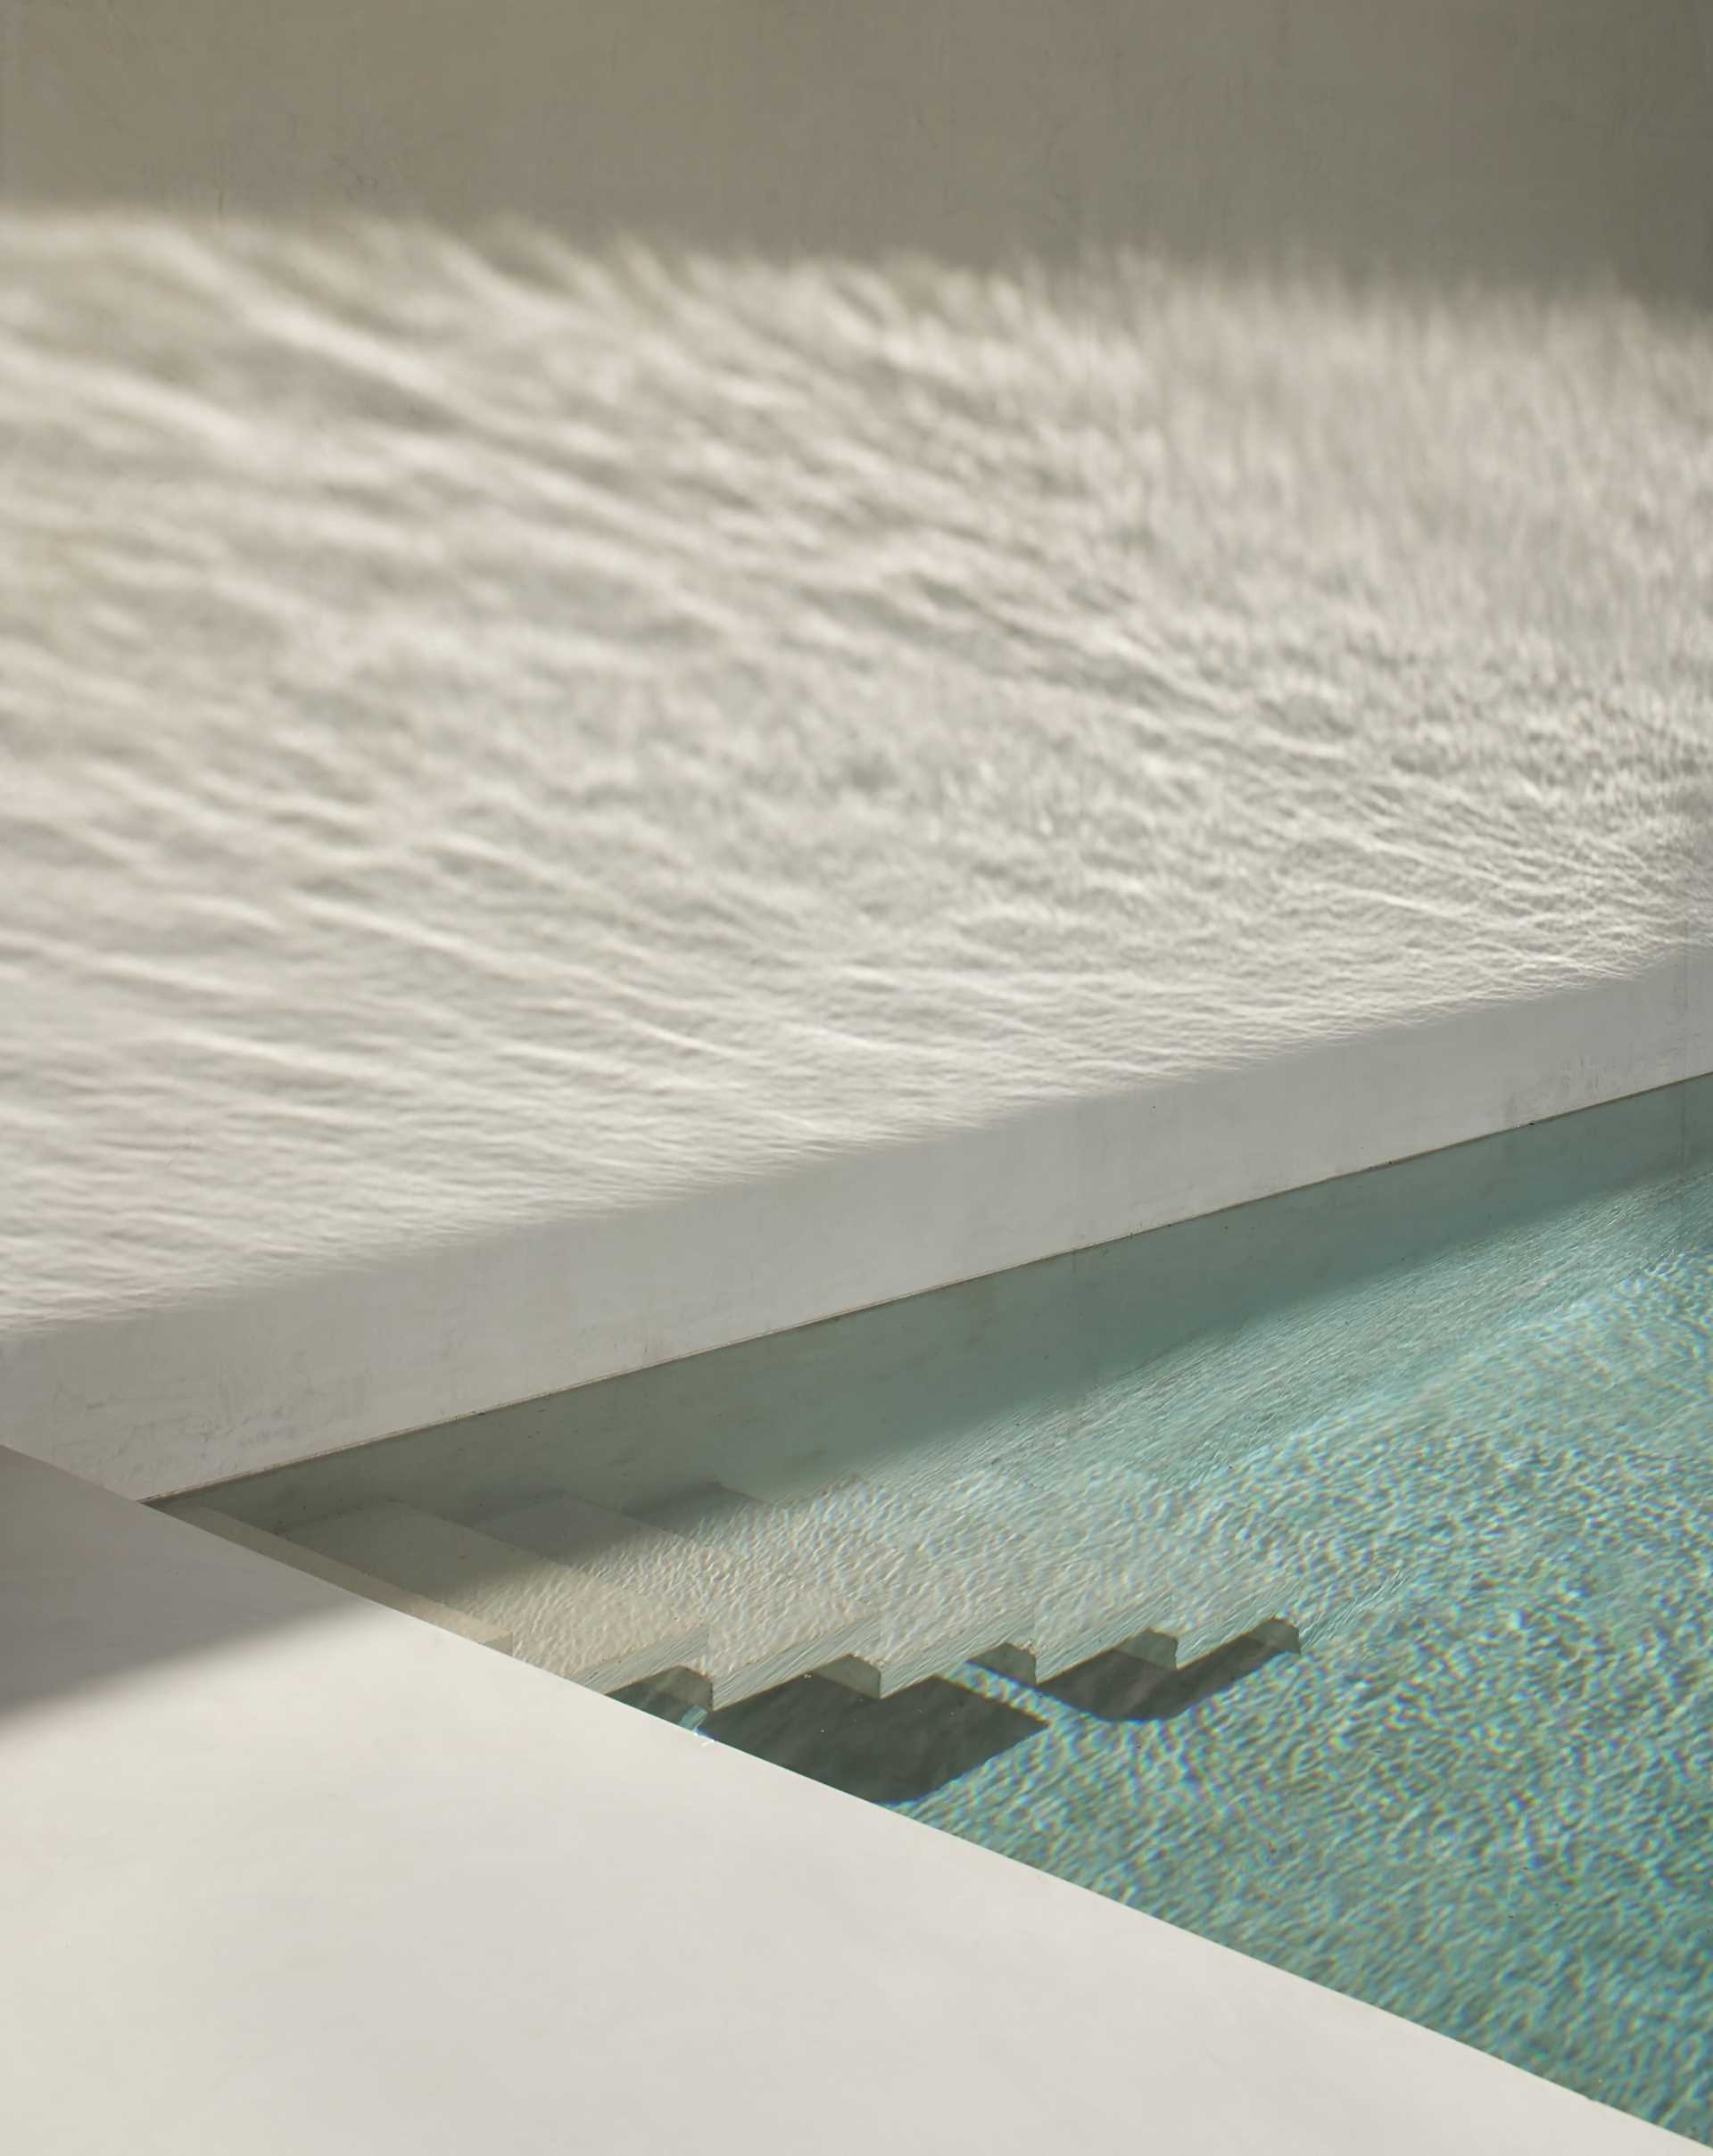 A modern pool design with cantilevered stairs leading into the water.